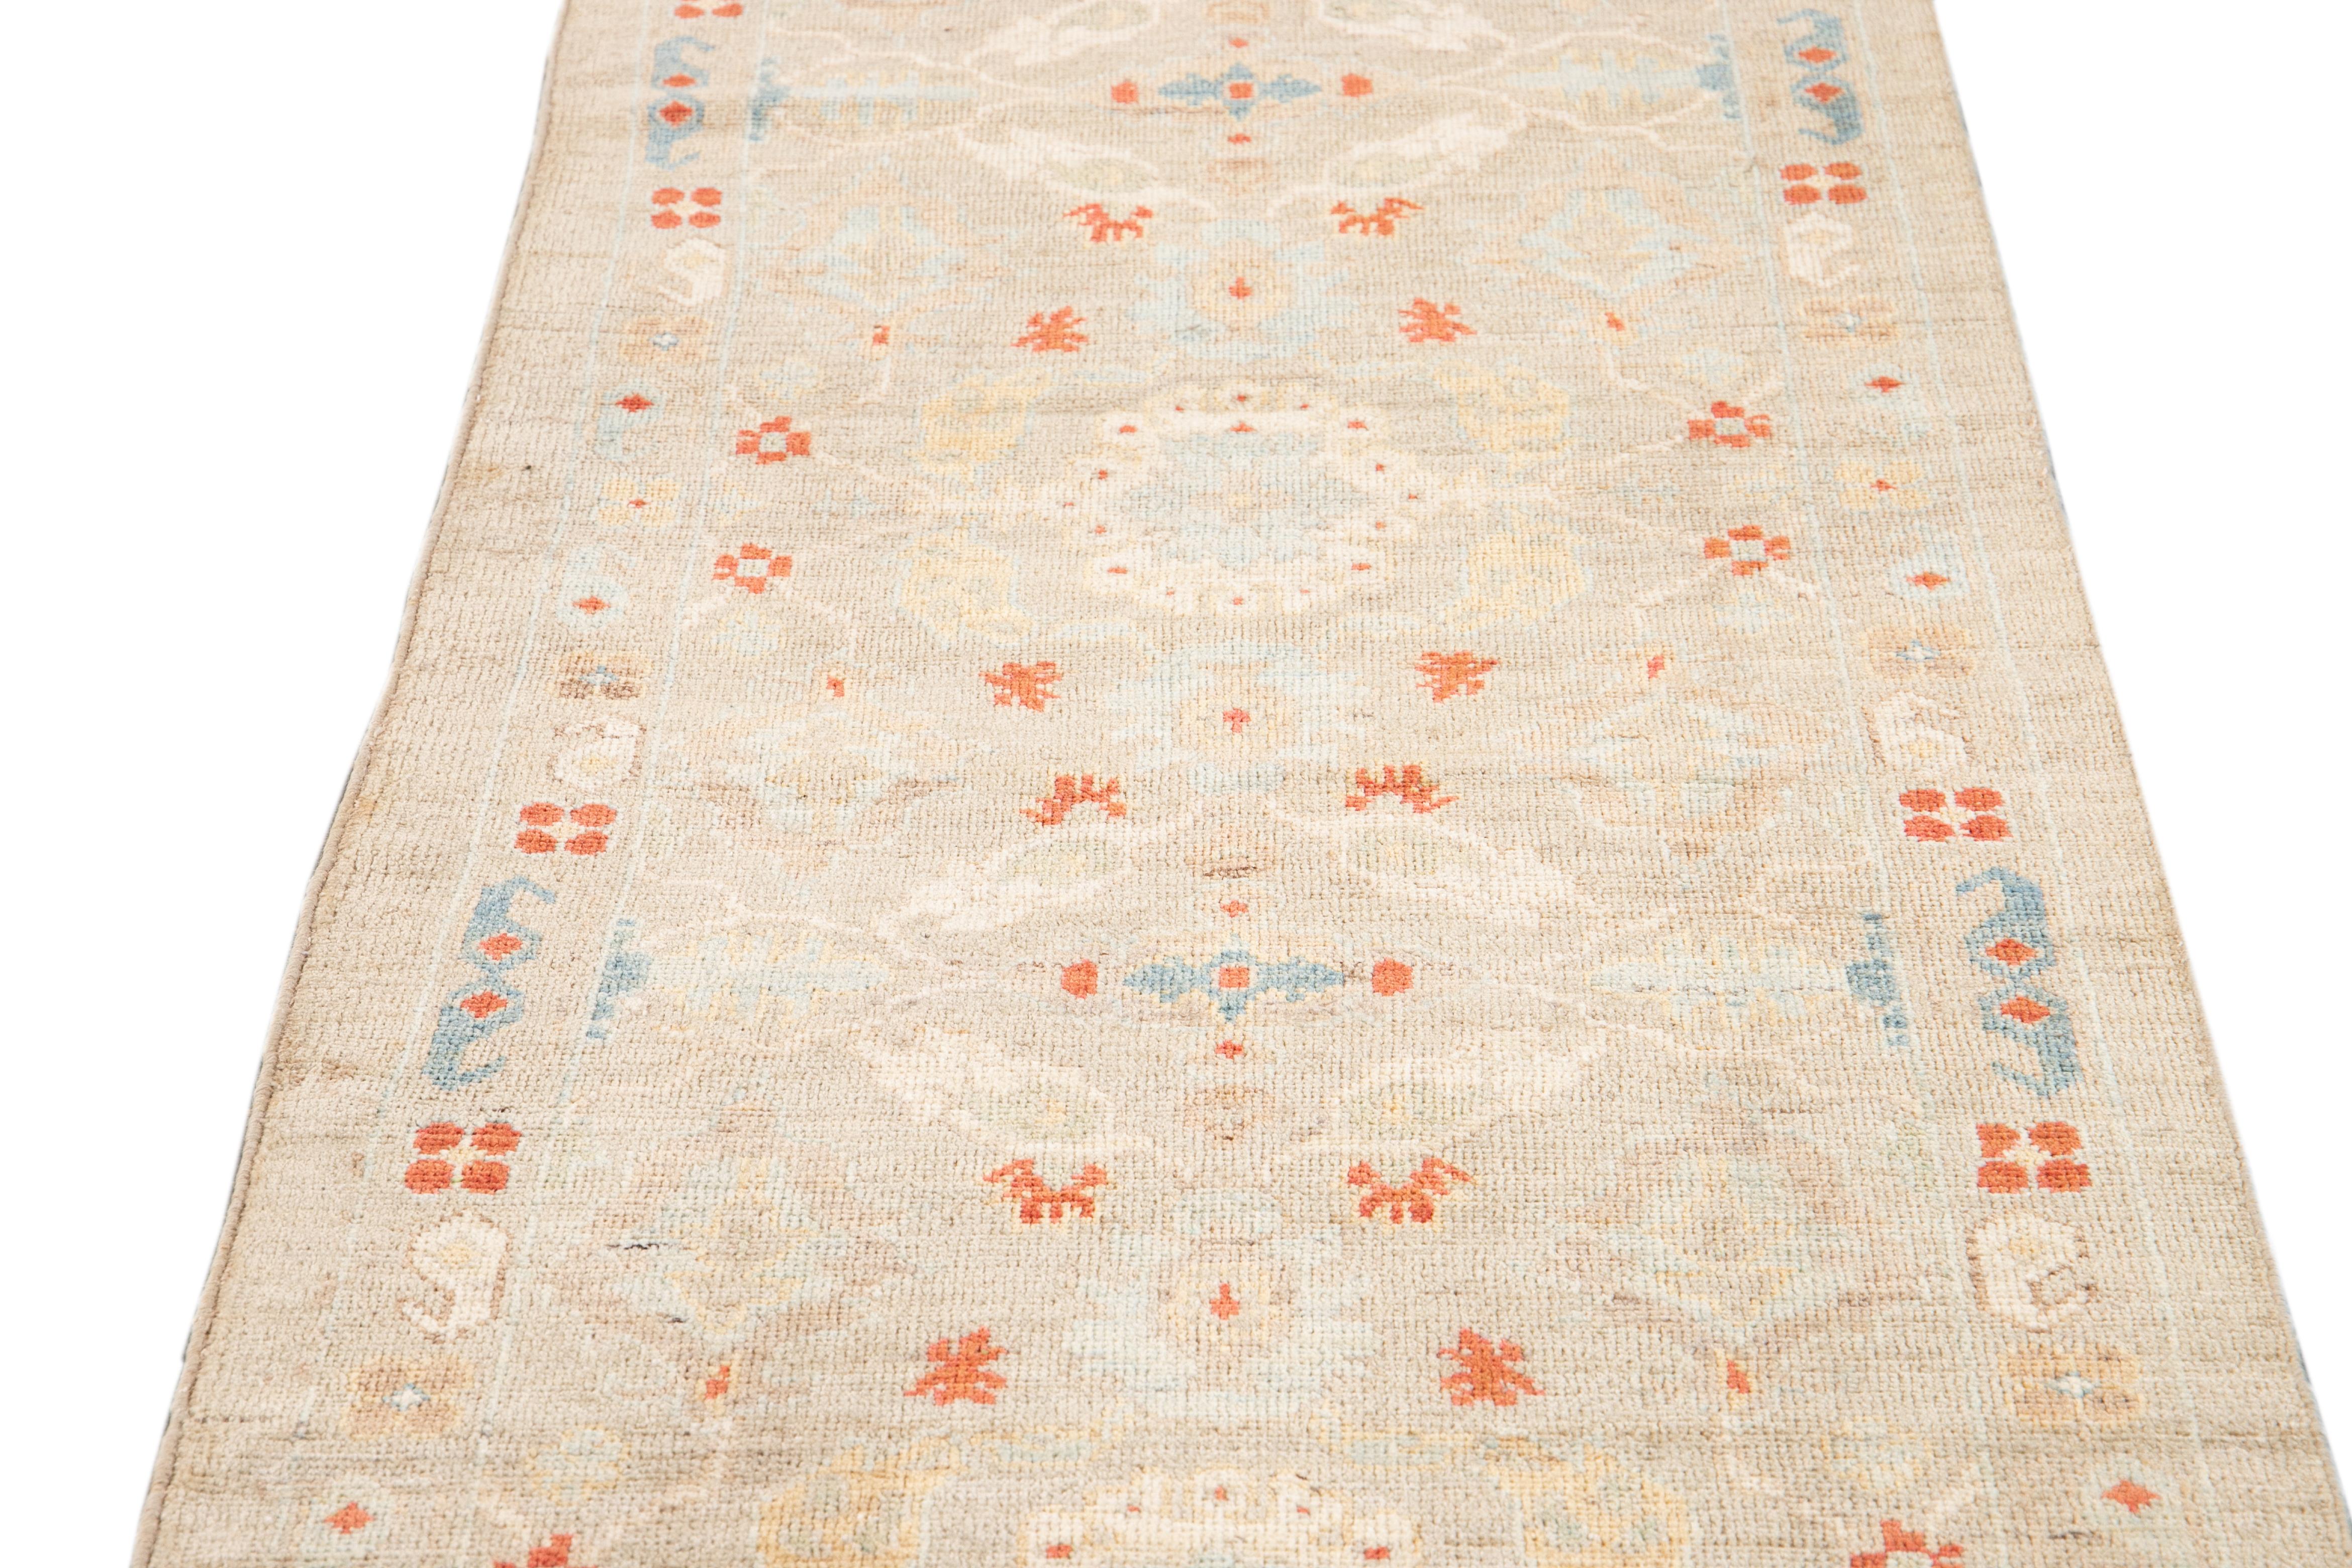 Beautiful contemporary Sultanabad runner rug, hand knotted wool with an tan field, orange and light blue accents all-over the design.
This rug measures 3' 1